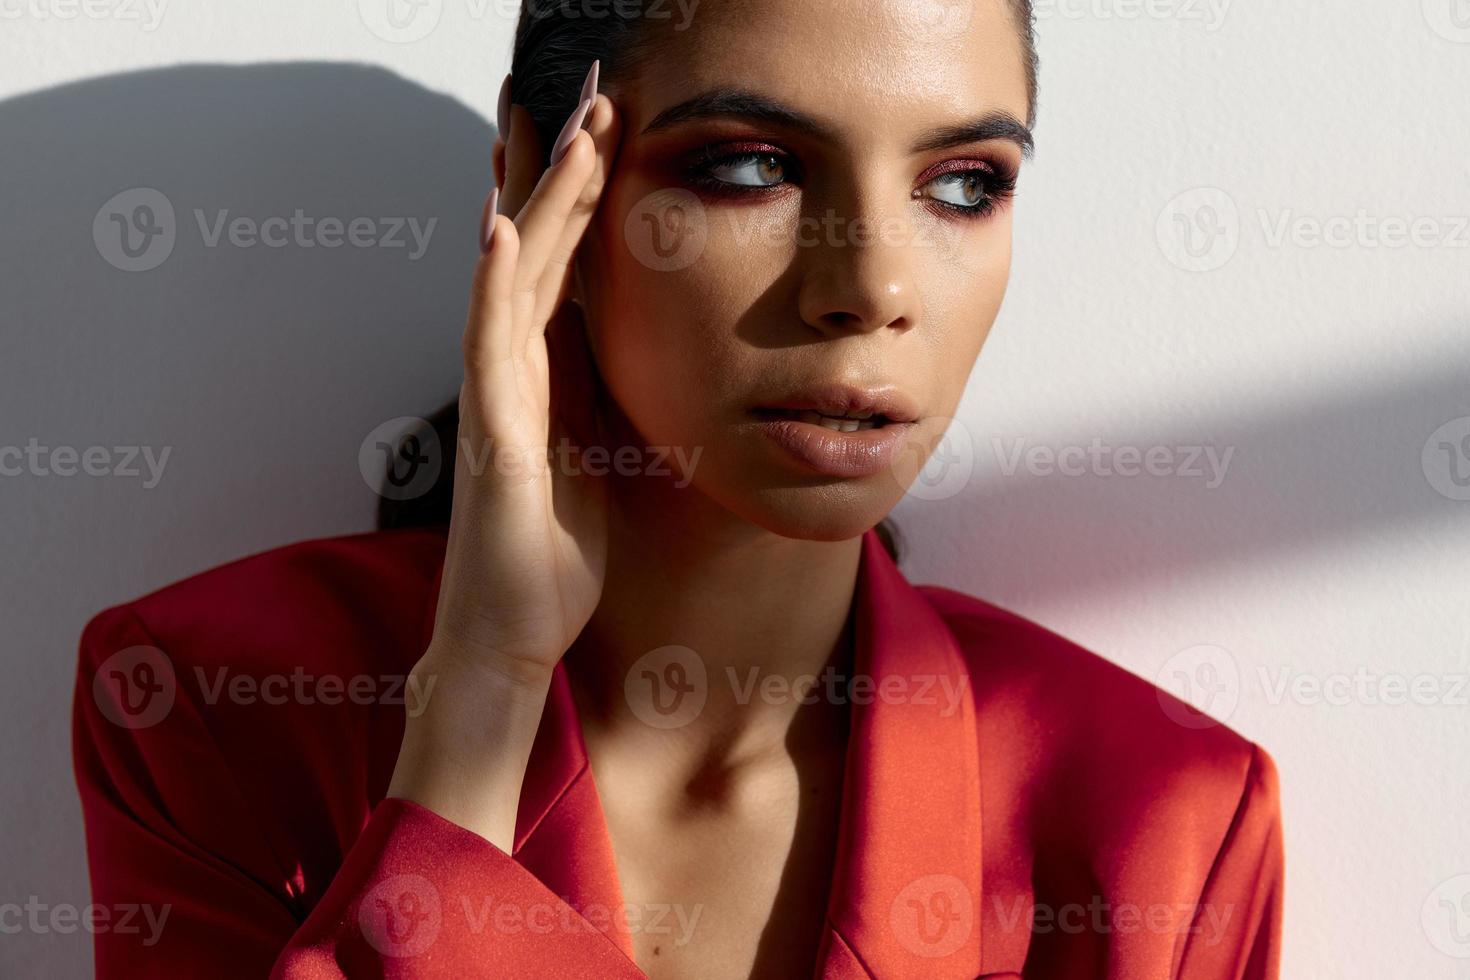 woman in a red jacket holds a hand near the face on a light background fashion style photo